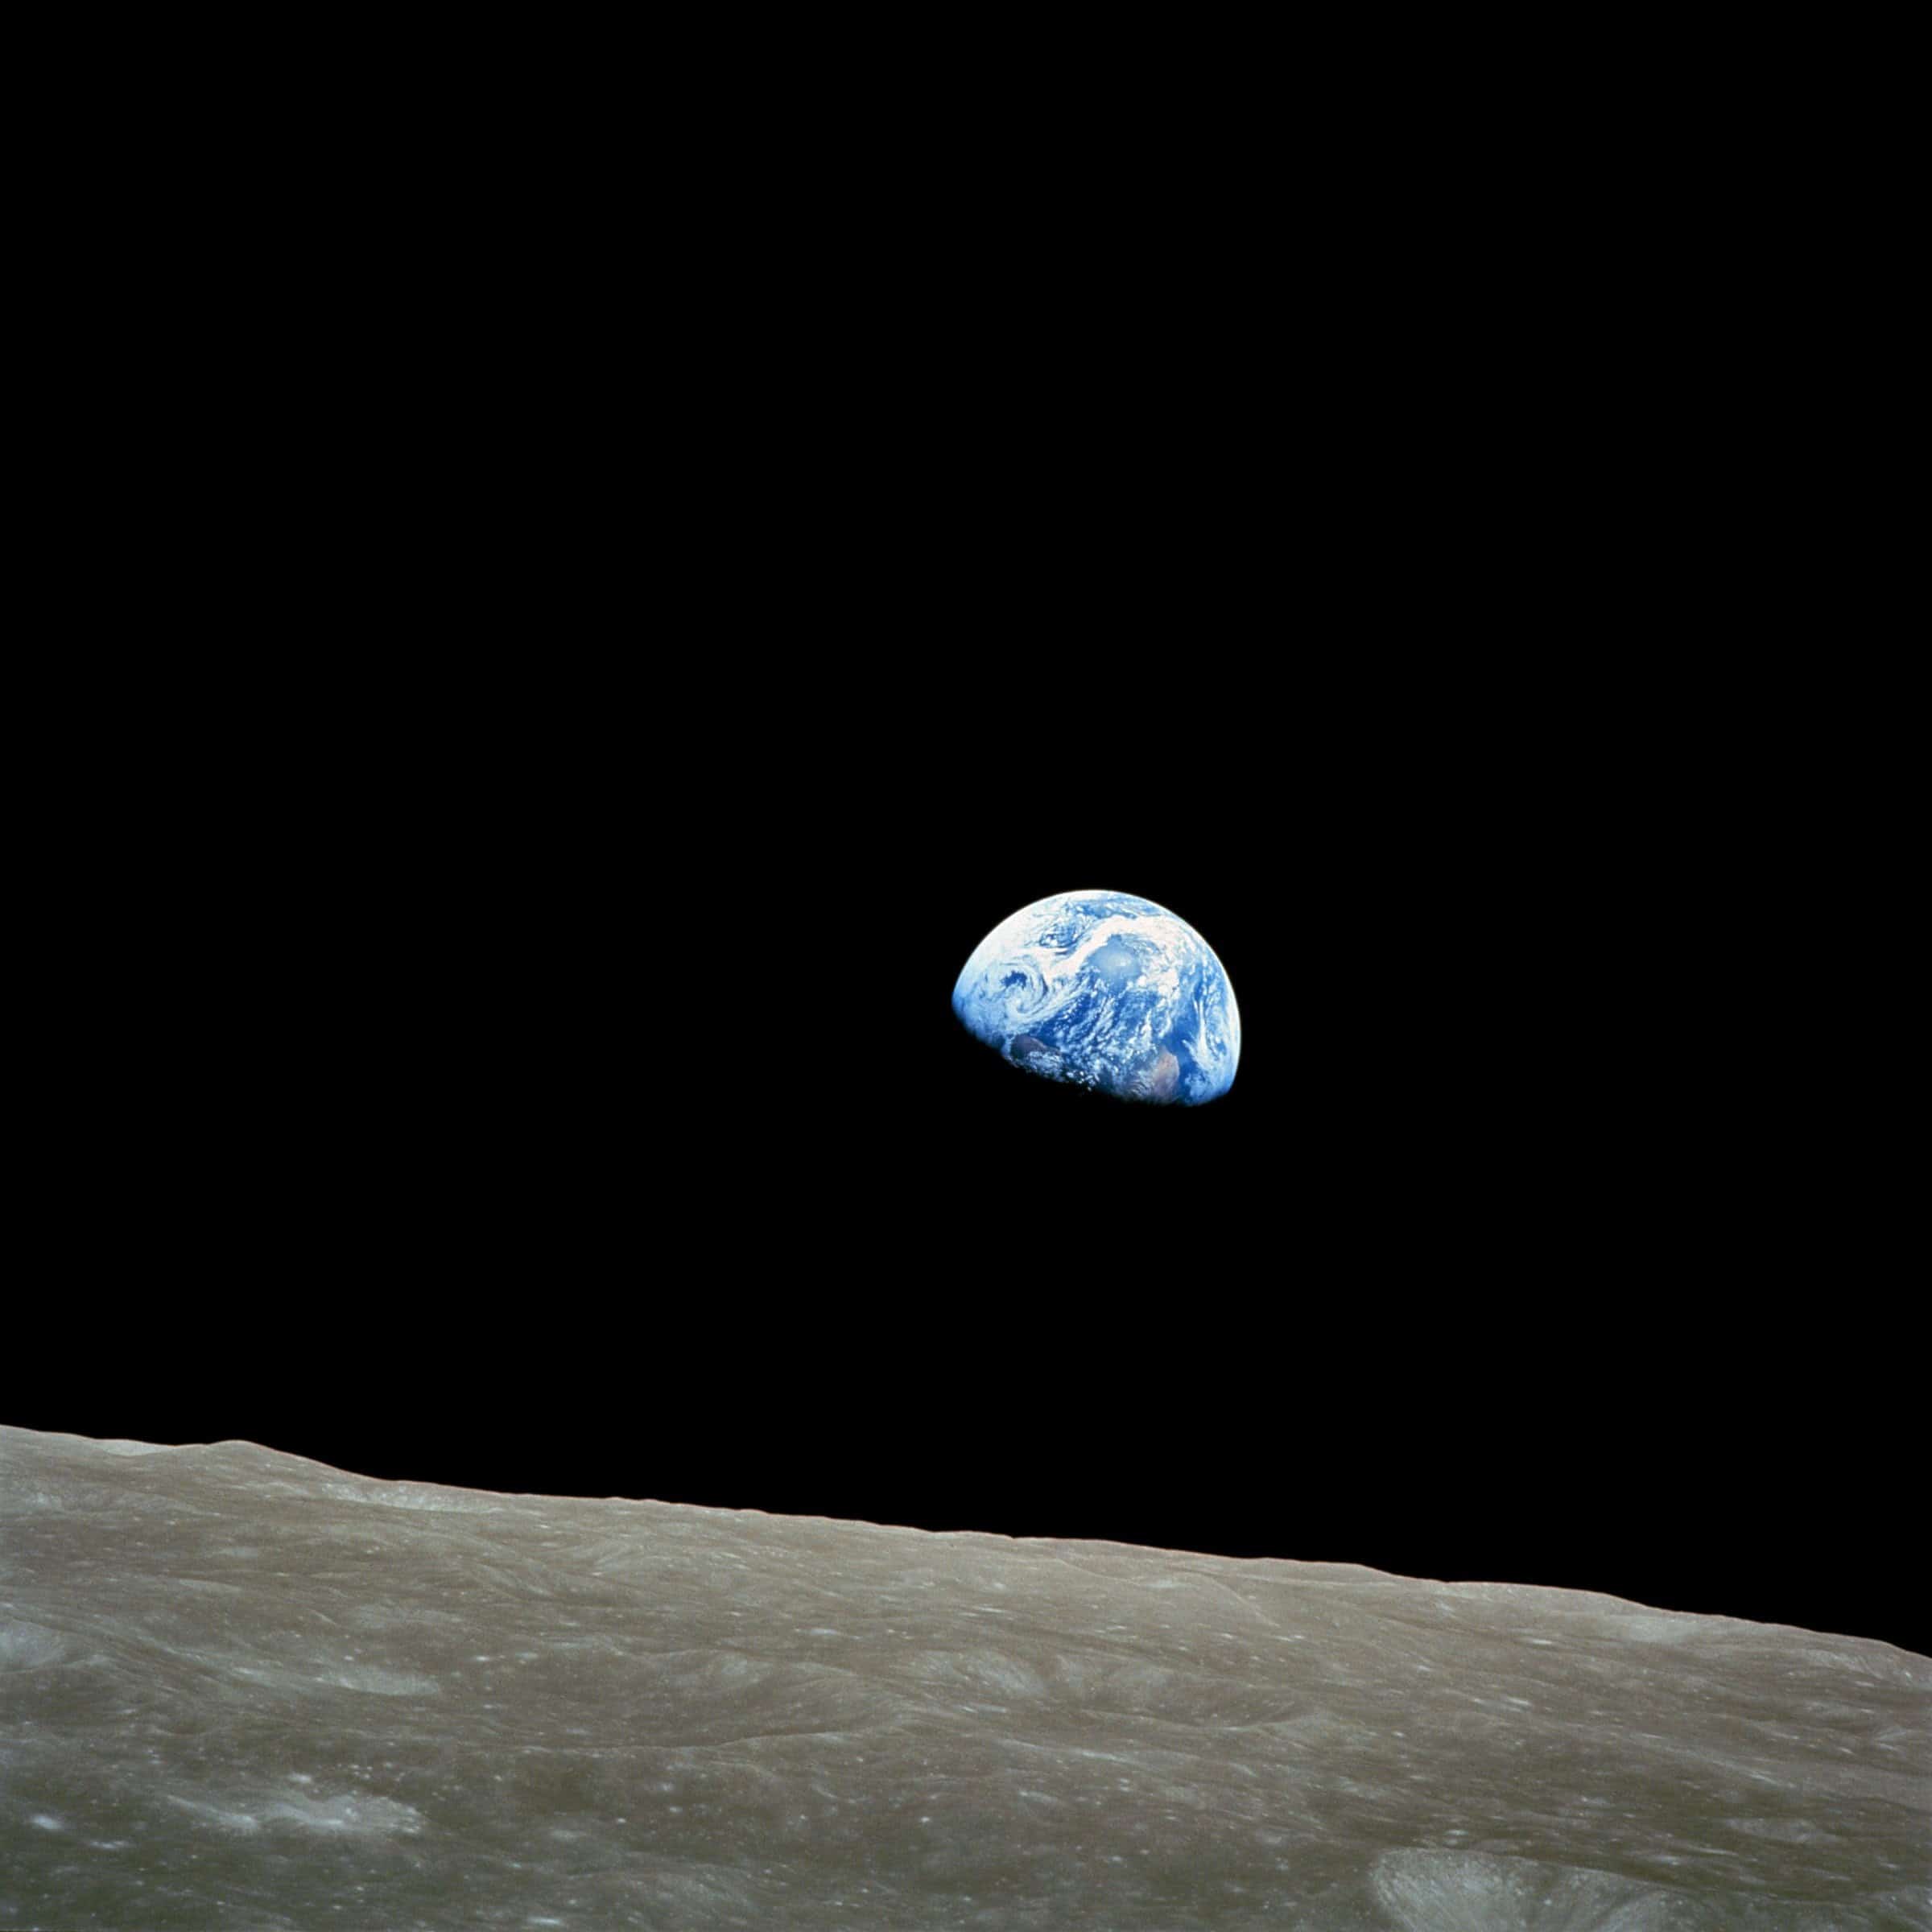 blue-and-white-planet-display-87009-1.jp